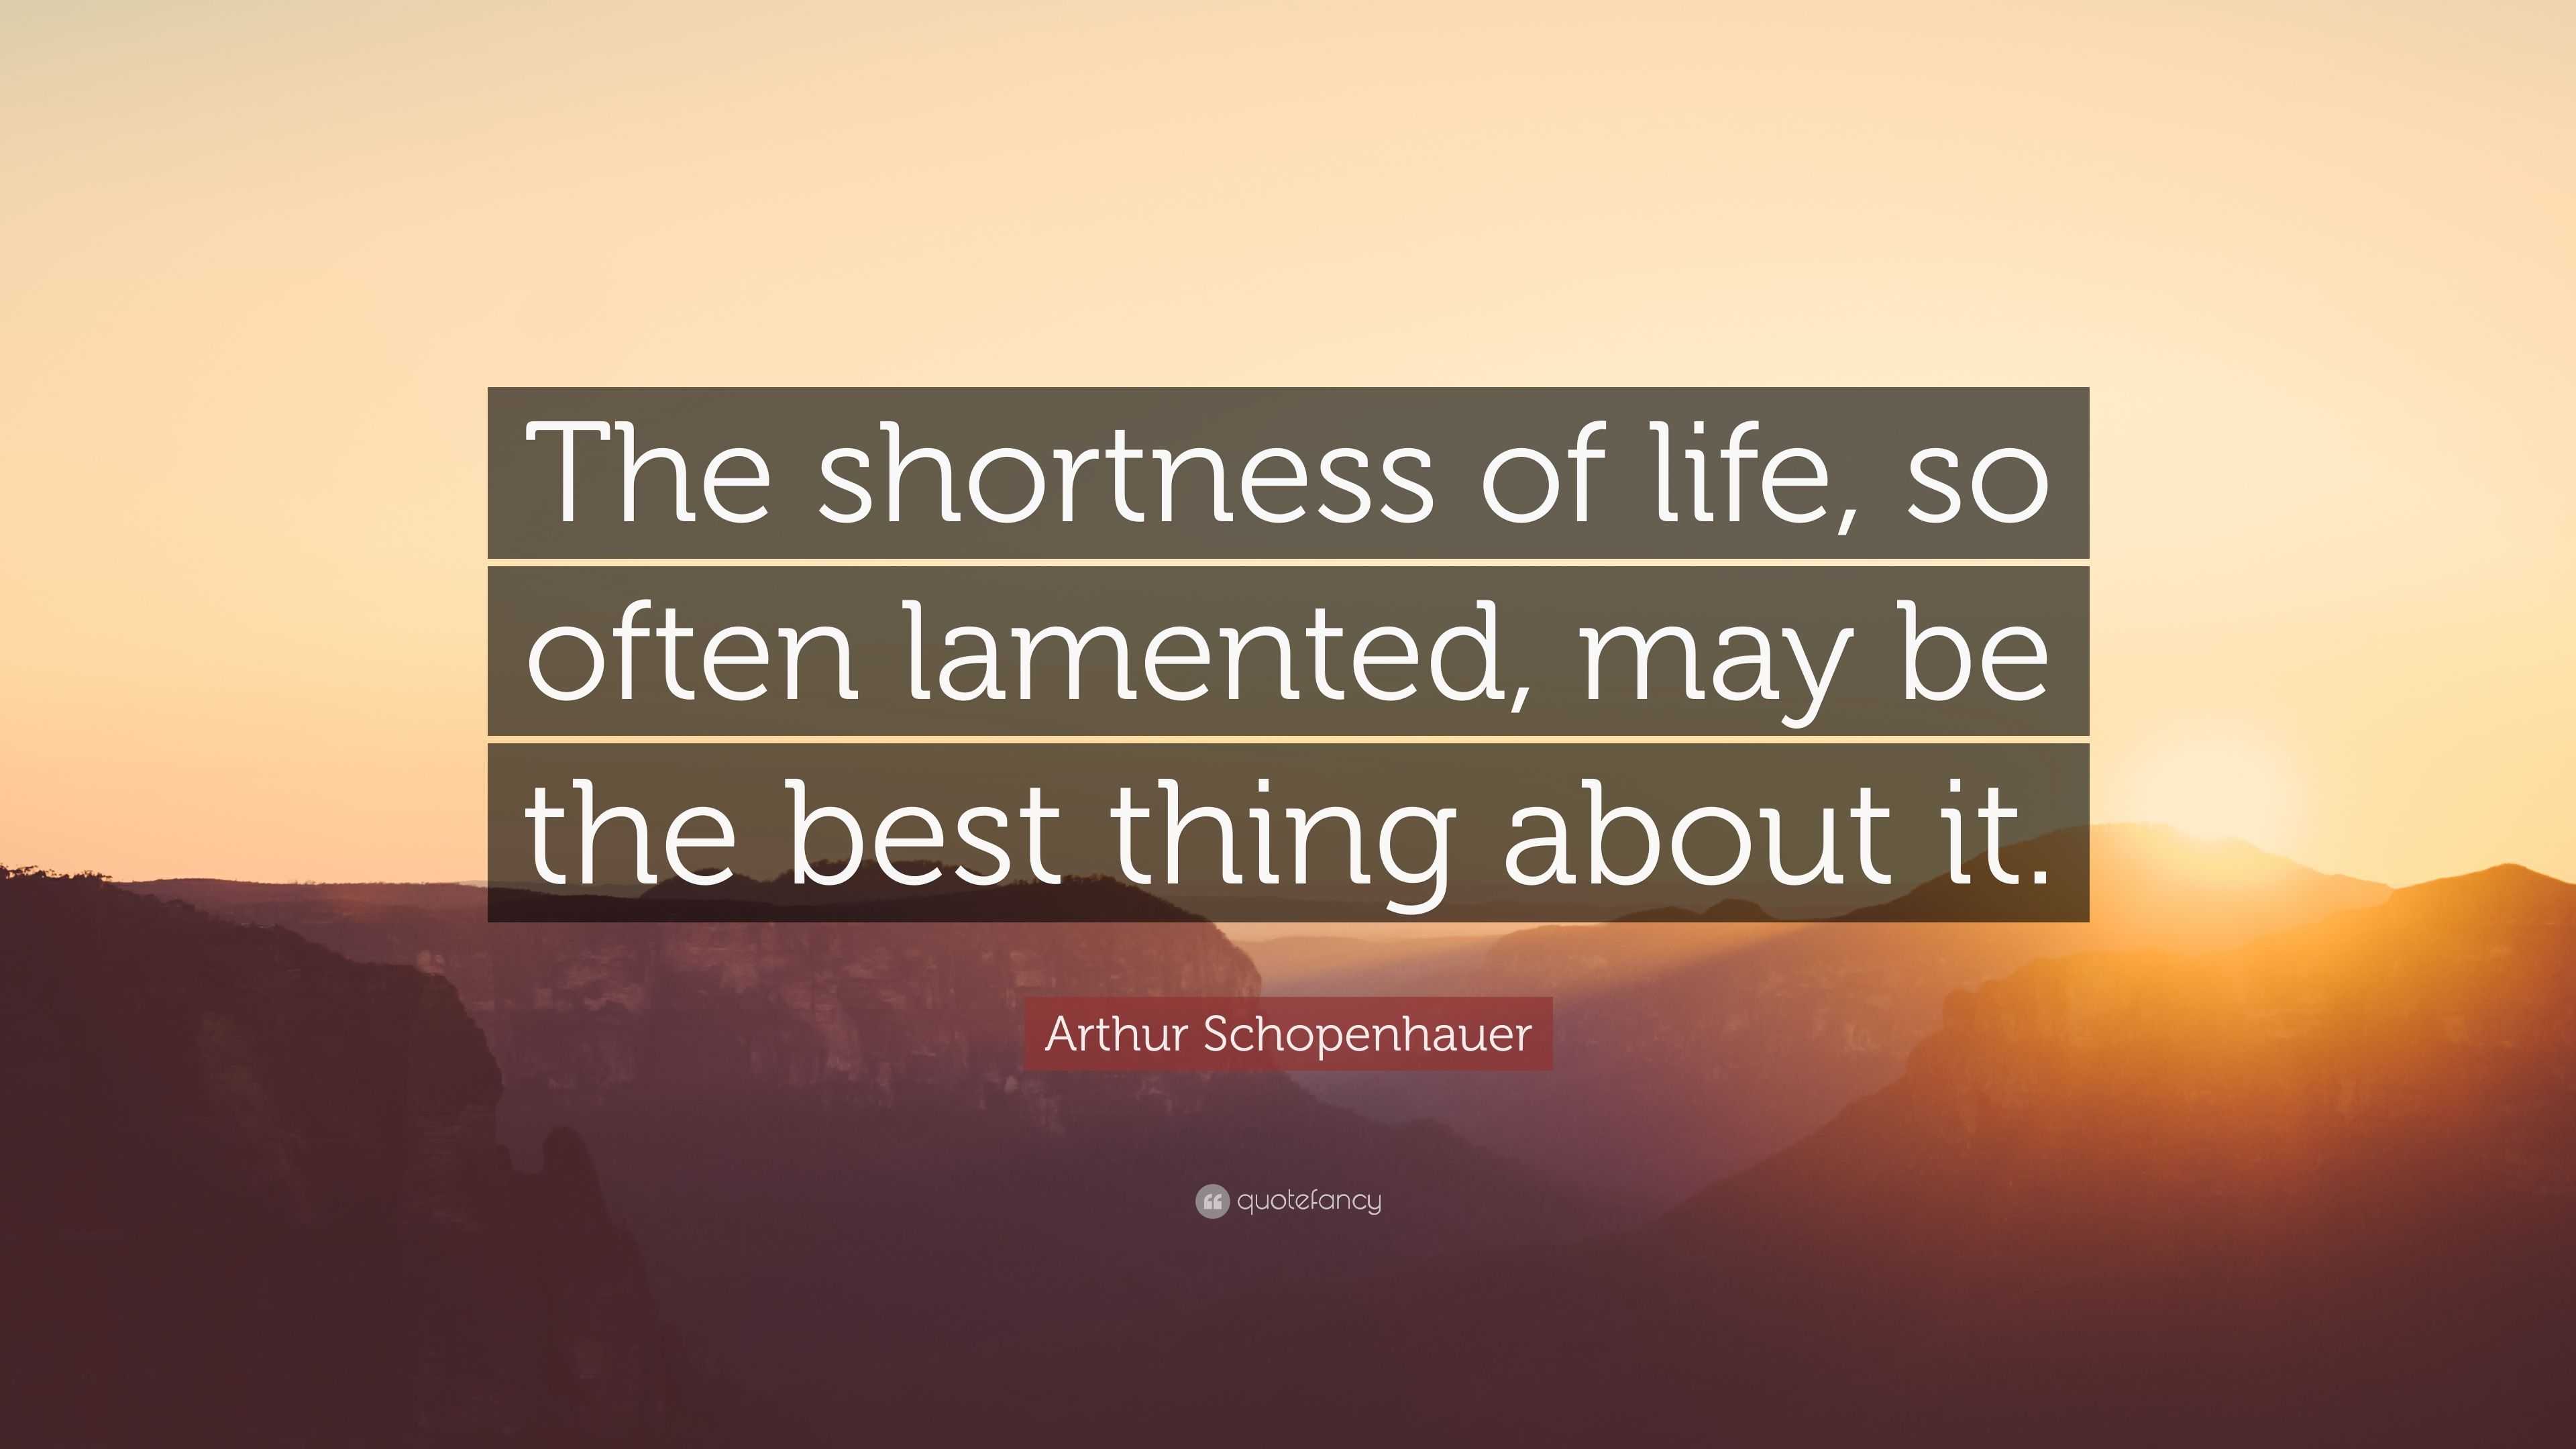 Arthur Schopenhauer Quote “The shortness of life so often lamented may be